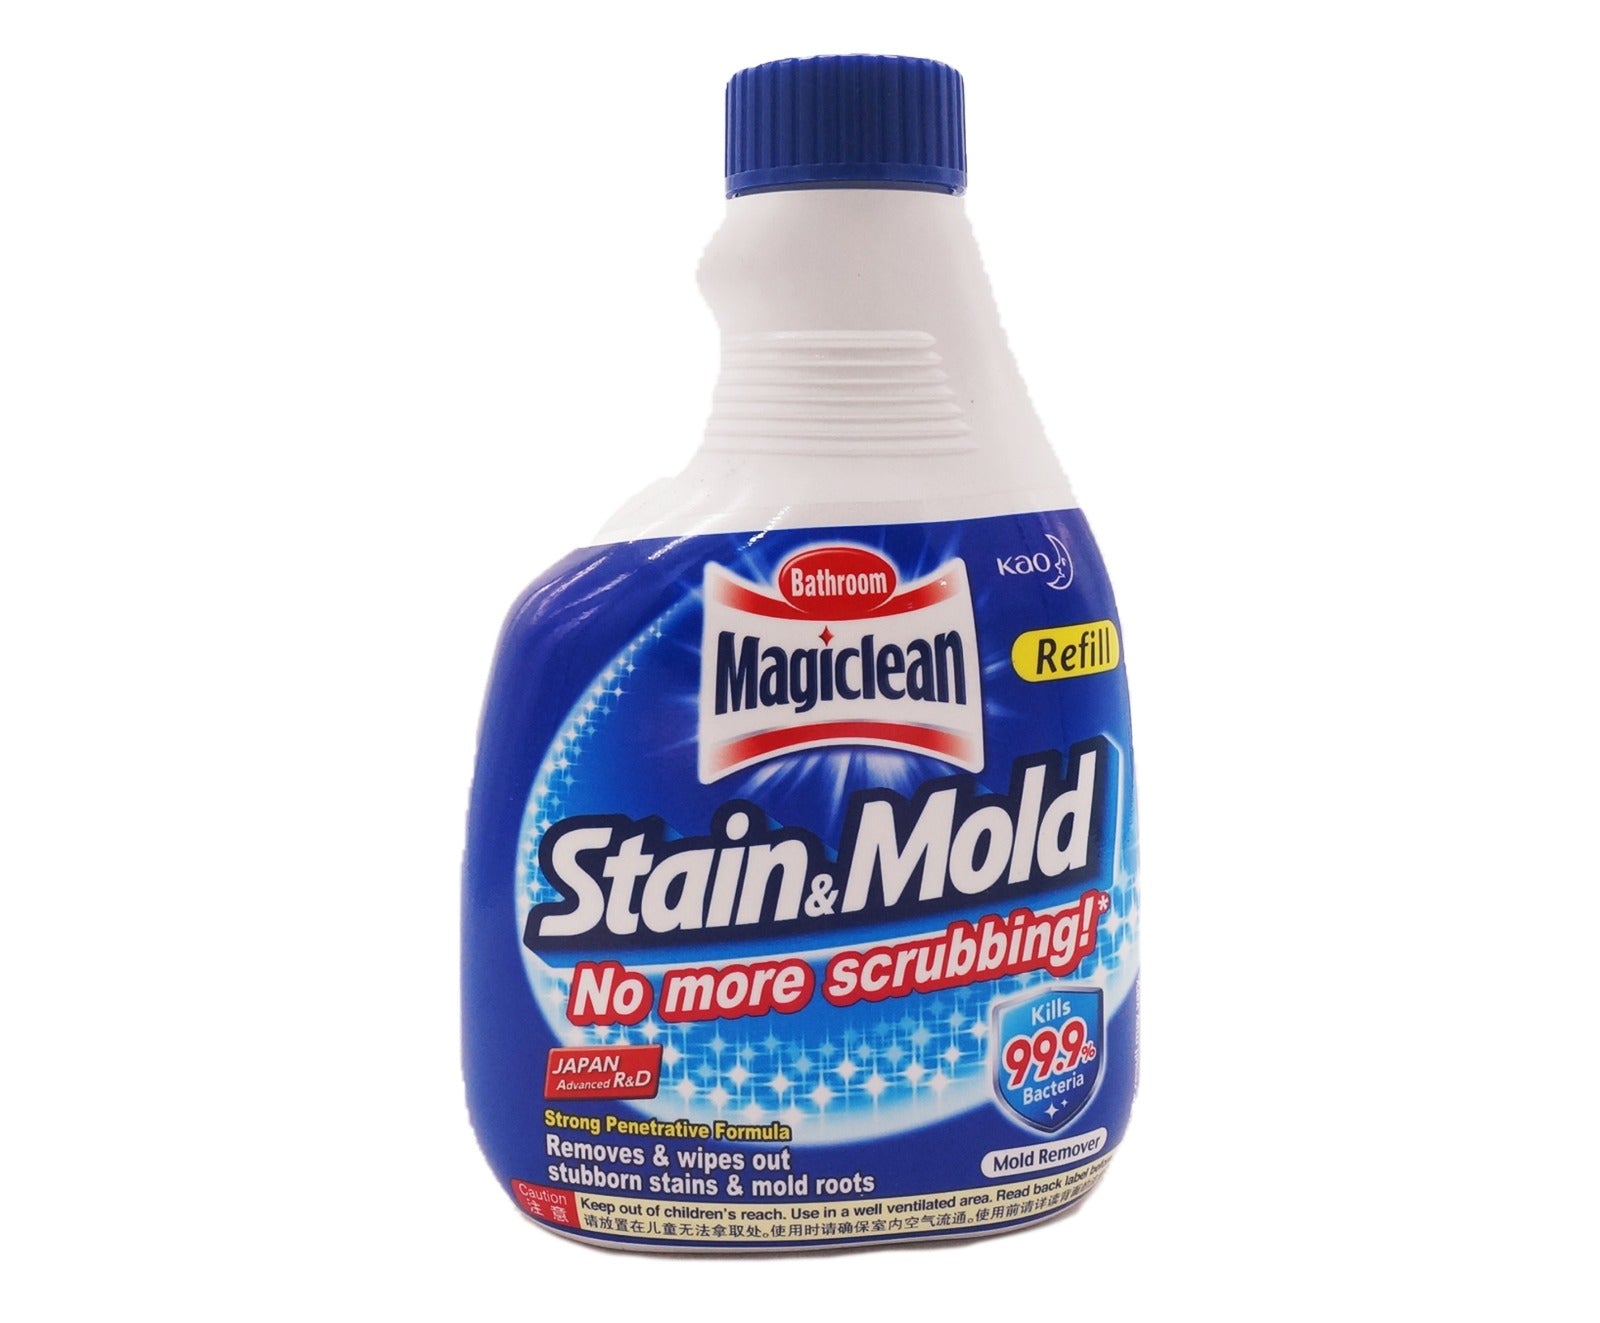 Magiclean Bathroom Stain & Mold Remover Refill (400ml – Piece)